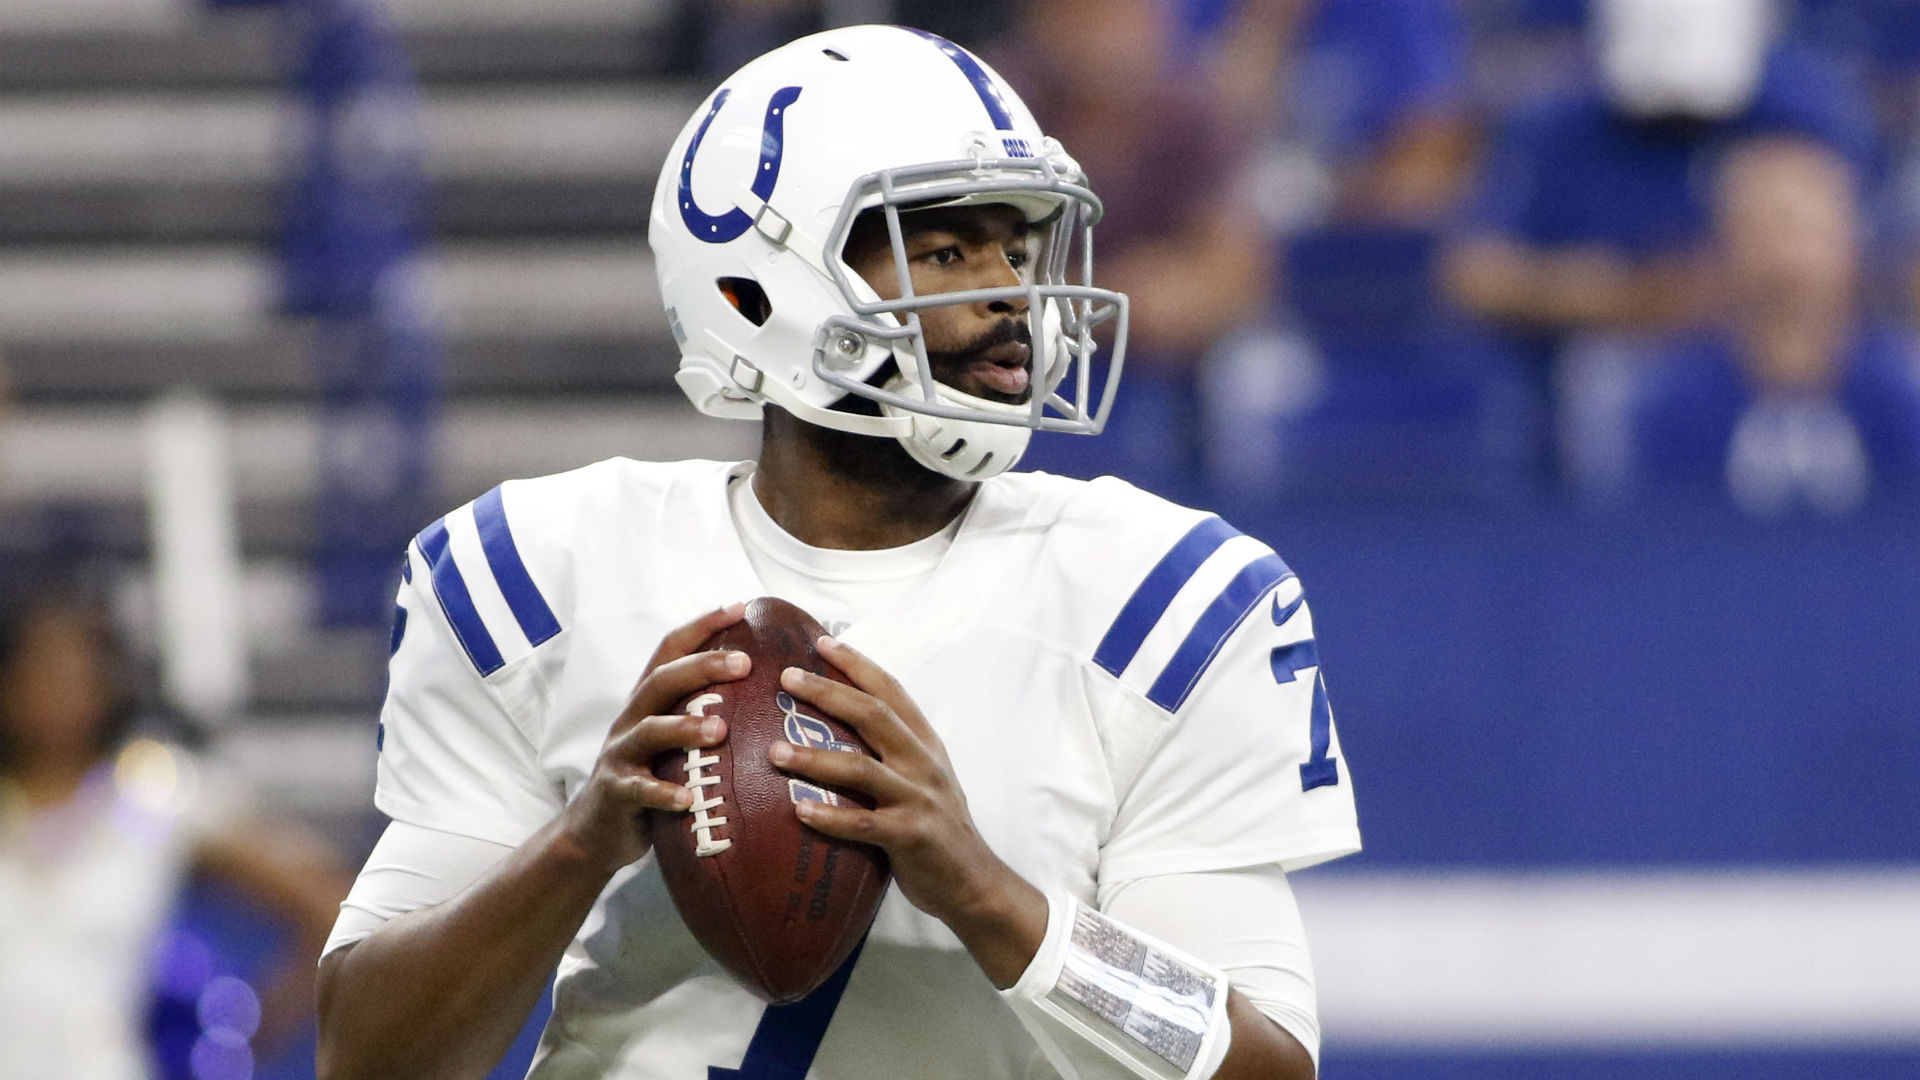 As the Indianapolis Colts move into the post-Andrew Luck era, we examine whether Jacoby Brissett has what it takes to fill the void.